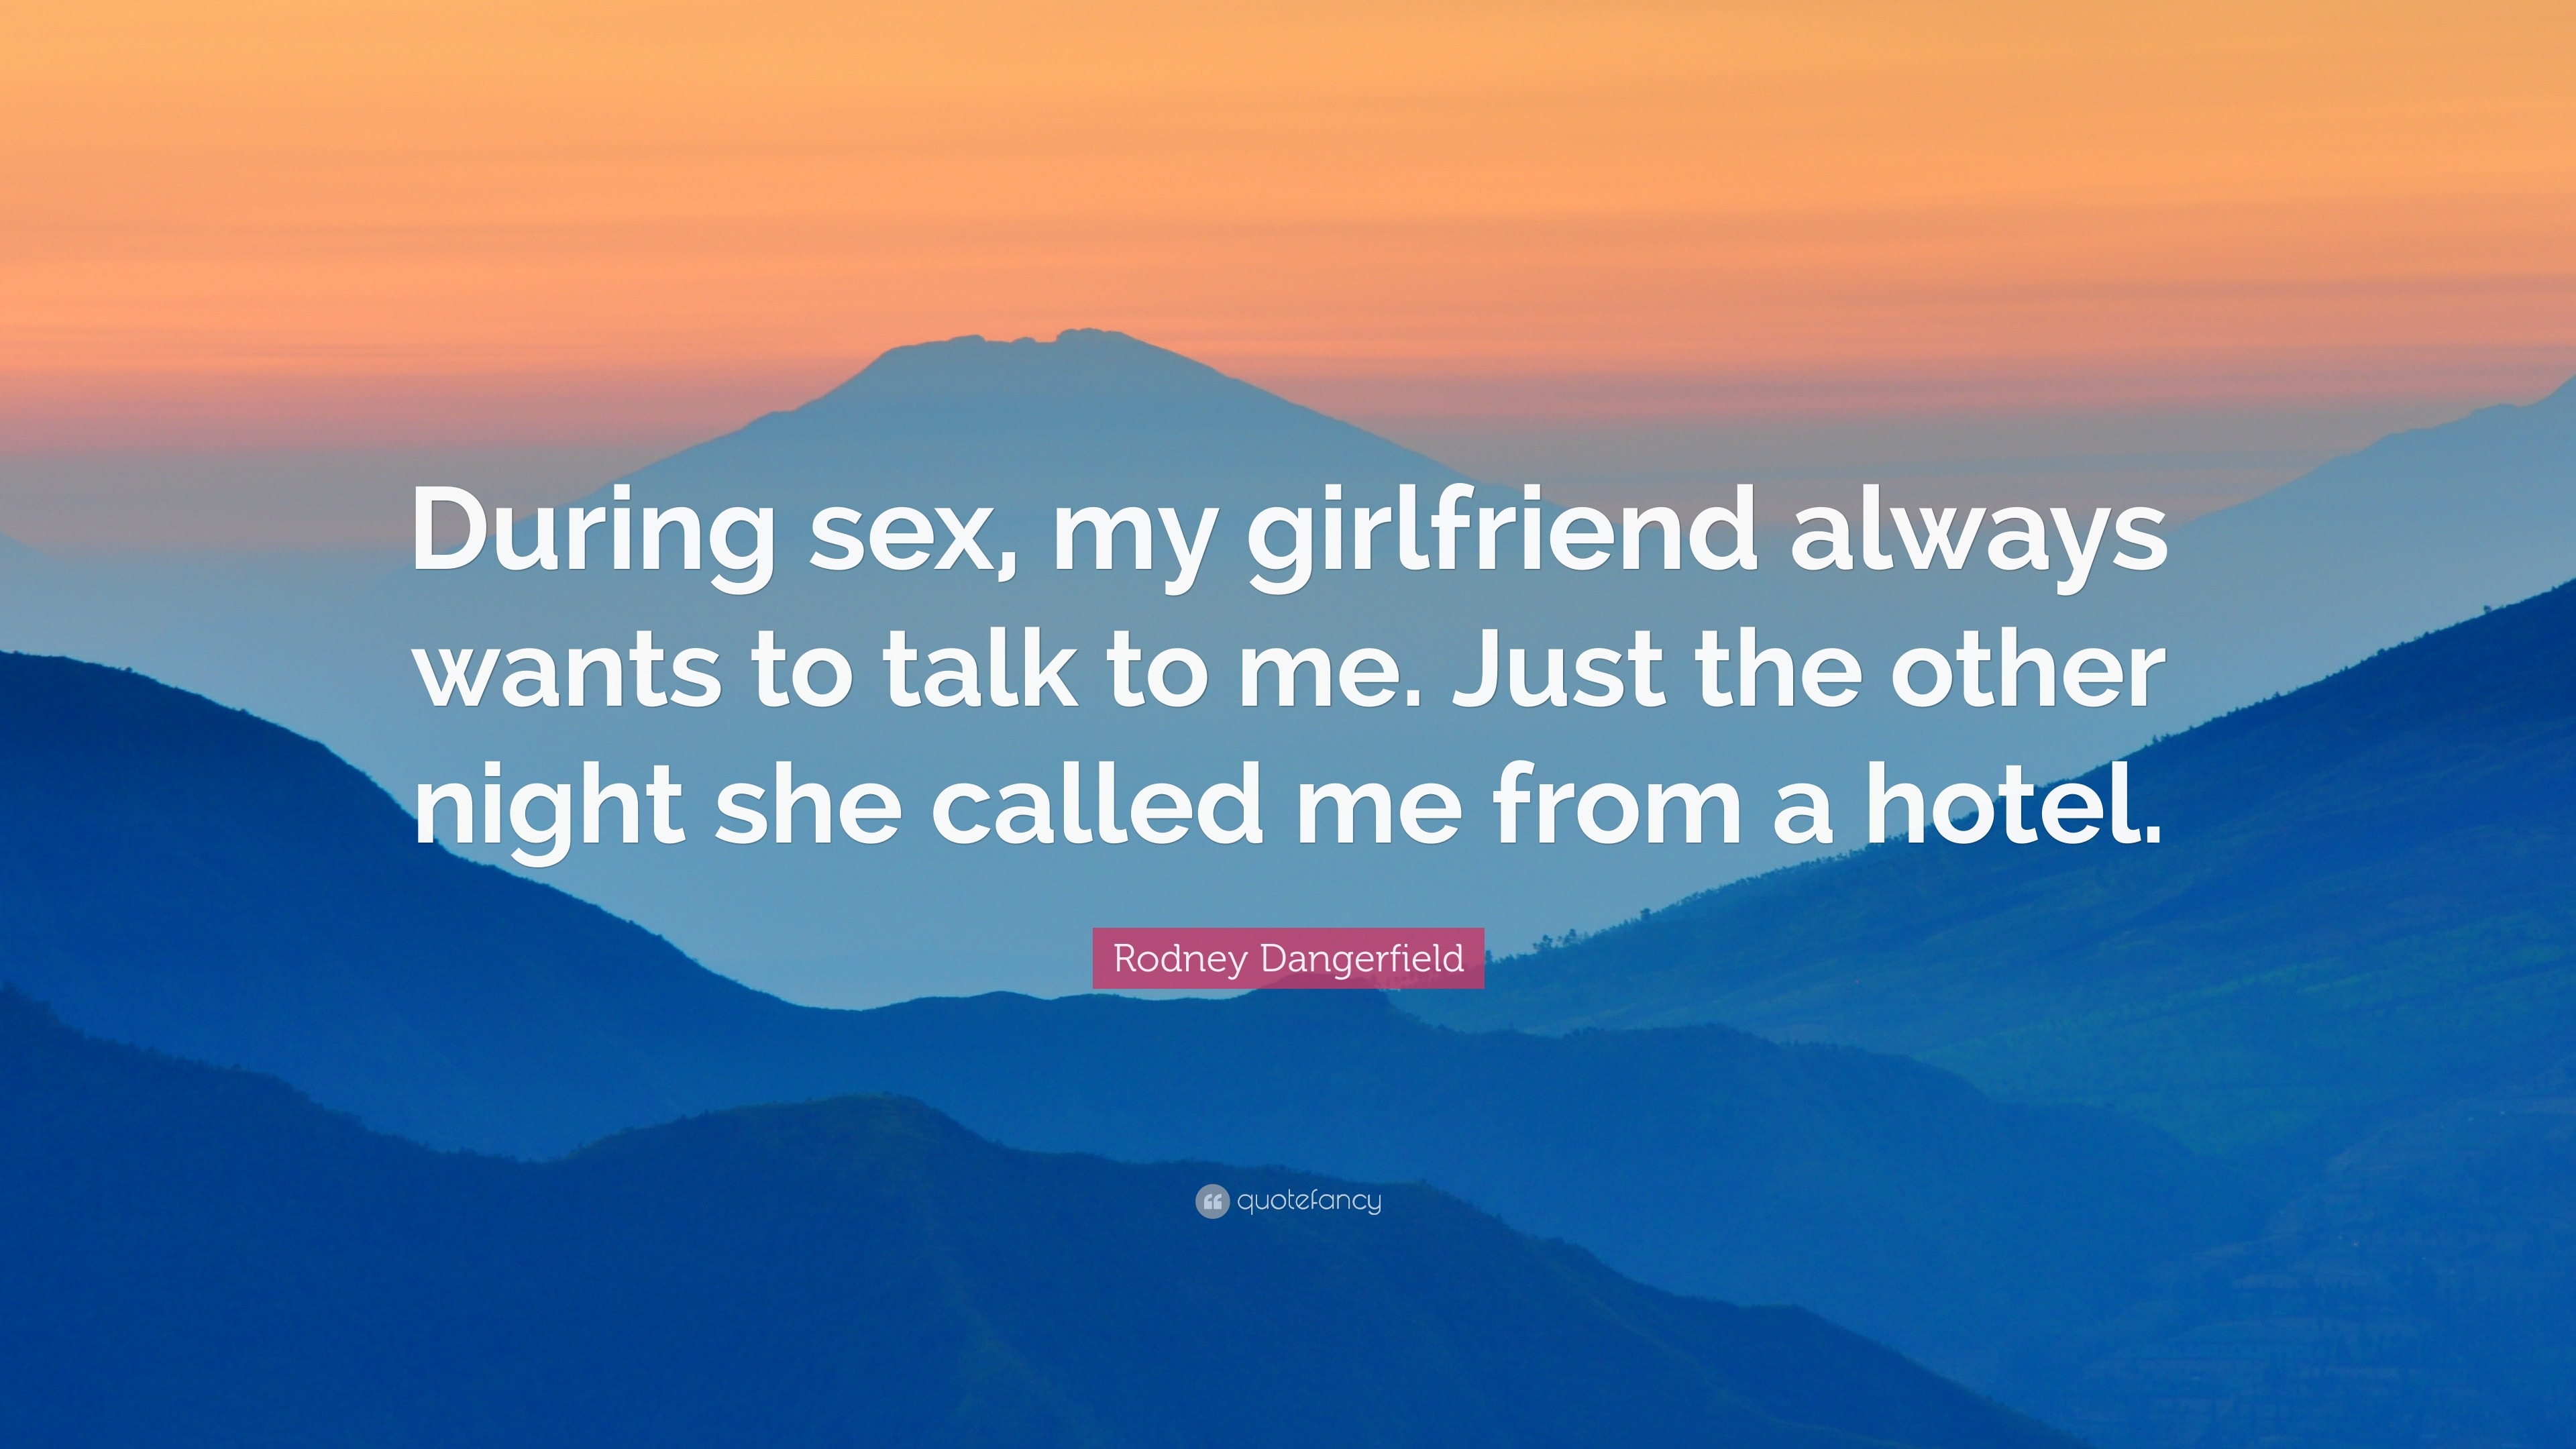 Rodney Dangerfield Quote “During sex, my girlfriend always wants to talk to me photo image